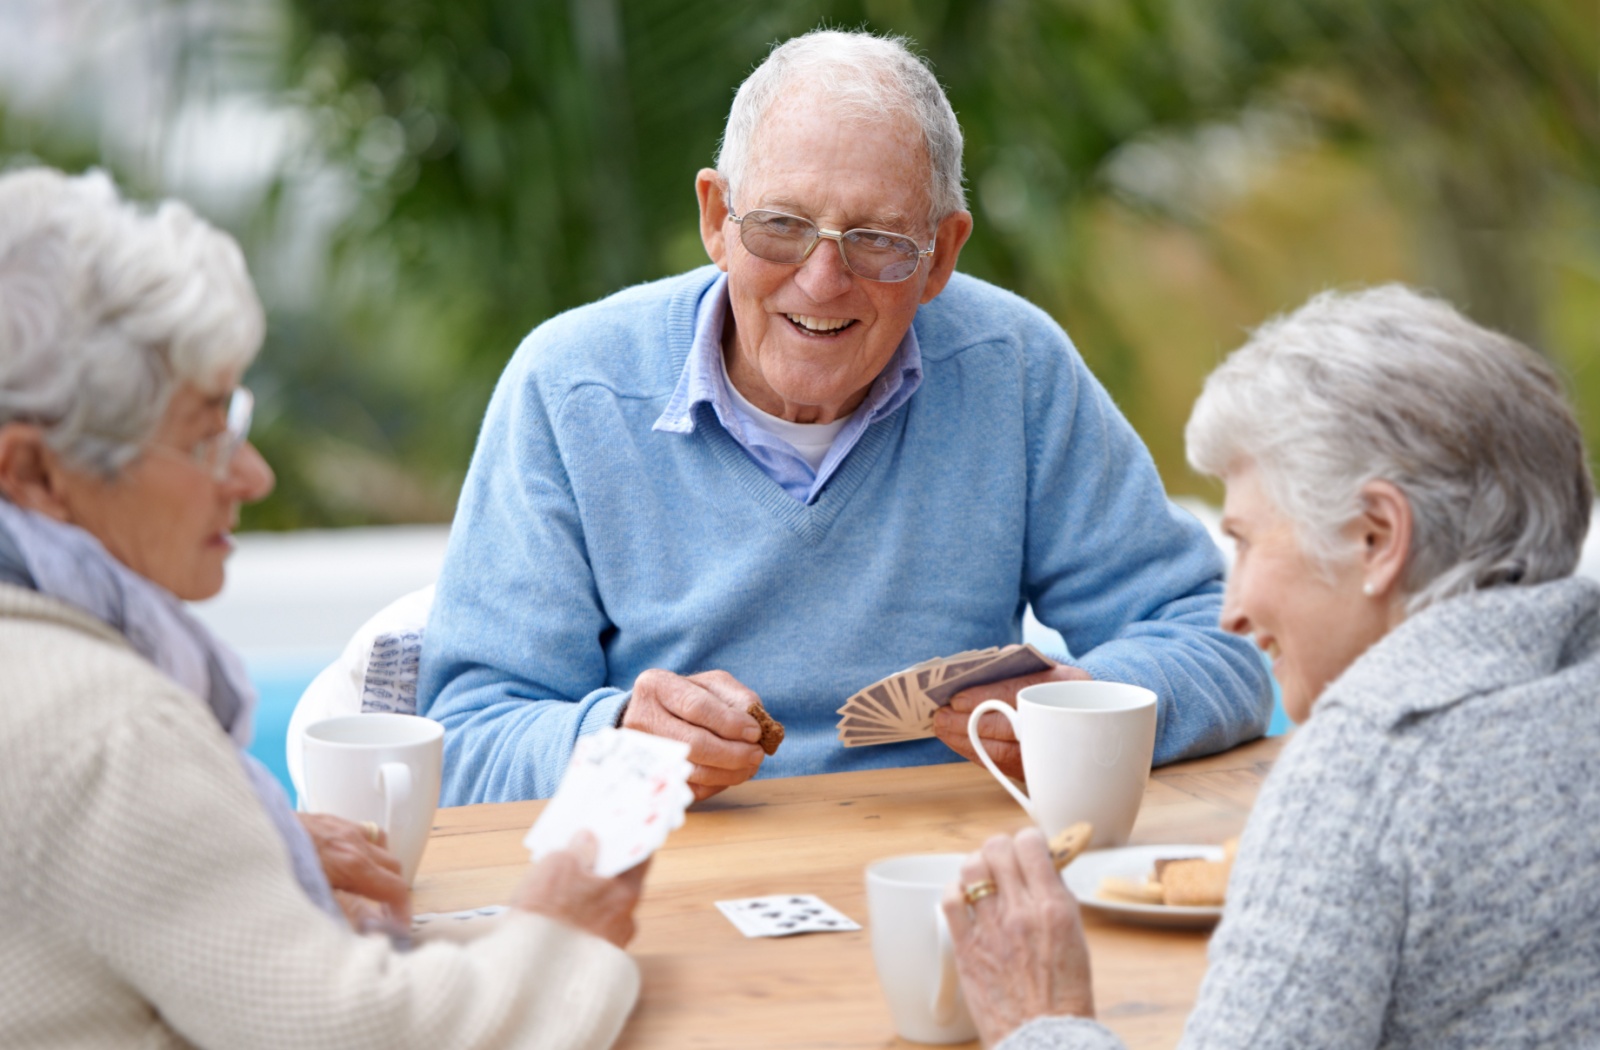 Three seniors sitting at a table playing cards and smiling
